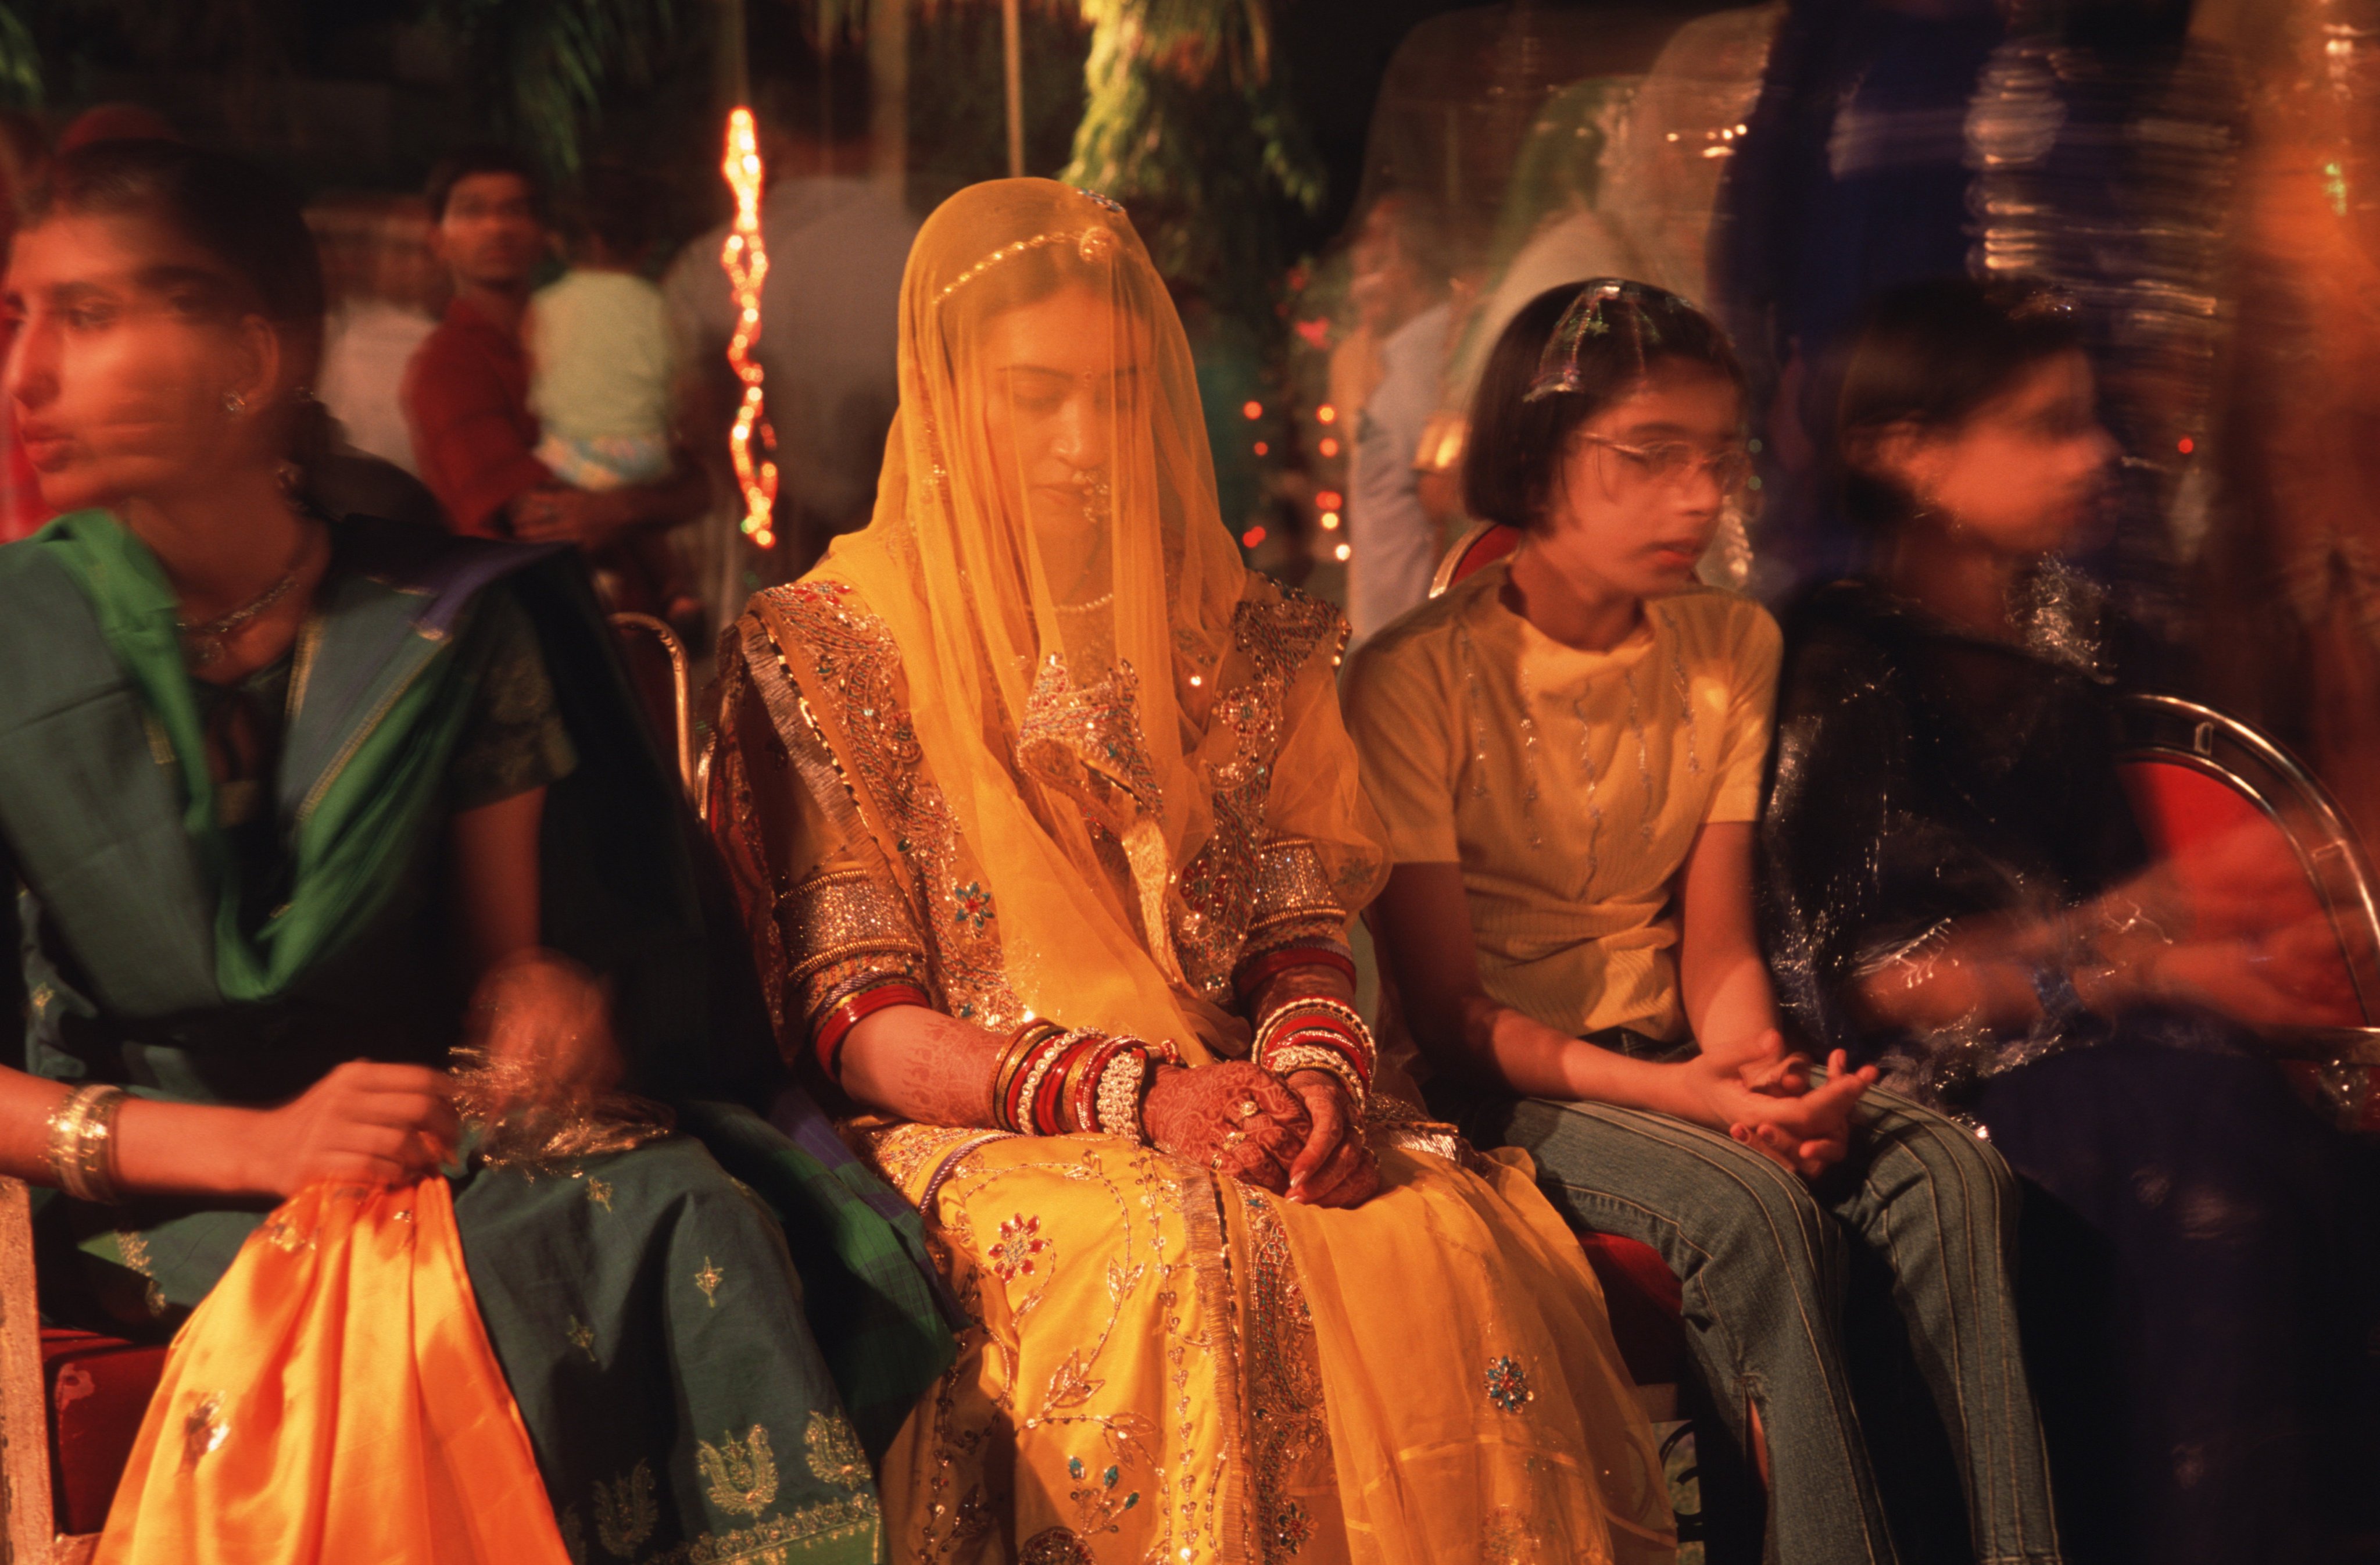 A bride sits during her marriage ceremony in India. Photo: Getty Images